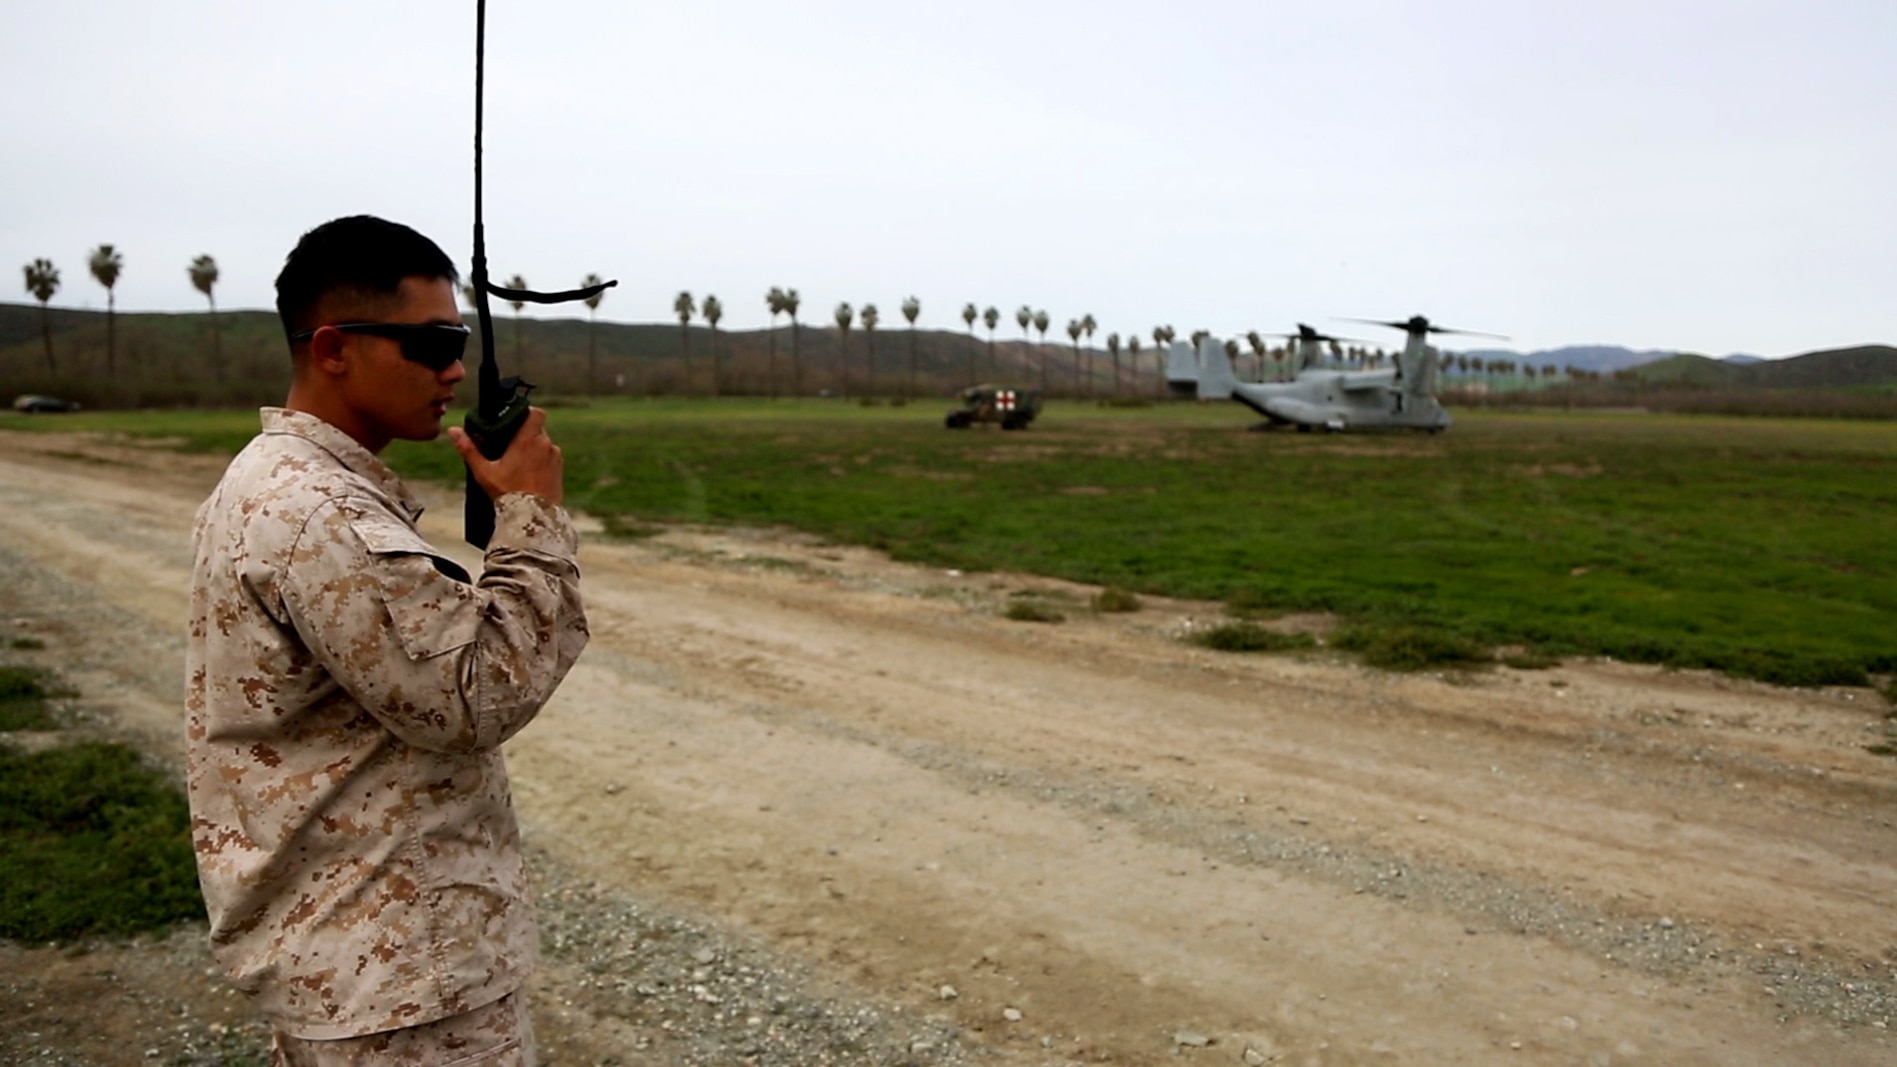 A data network specialist from Headquarters Regiment, 1st Marine Logistics Group, communicates with an MV-22 Osprey pilot during an en-route care exercise aboard Camp Pendleton, Calif., Jan. 28, 2015. During the four-day exercise, corpsmen trained to prepare a Special-Purpose Marine Air-Ground Task Force group that is going to forward deploy later this year. The more than 40 corpsmen set up a shock trauma platoon facility, or mobile emergency room, to treat simulated casualties. The casualties were stabilized in the STP and then flown out via aircraft. (U.S. Marine Corps photo by Sgt. Laura Gauna/Released)